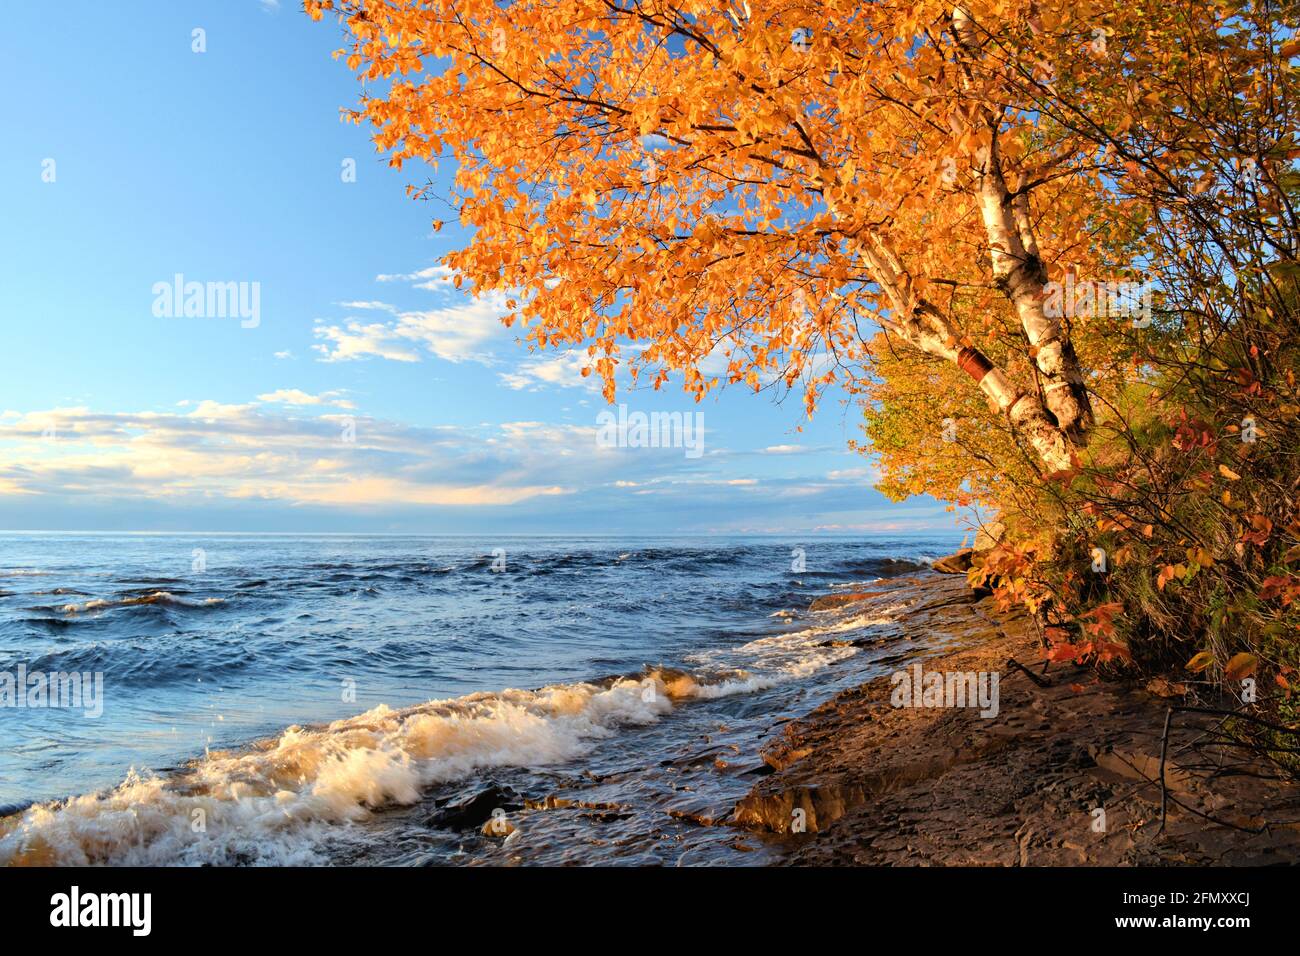 A birch tree on the lakeshore blazes with autumn colors of orange and gold, set off by a bright blue sky and low clouds Stock Photo